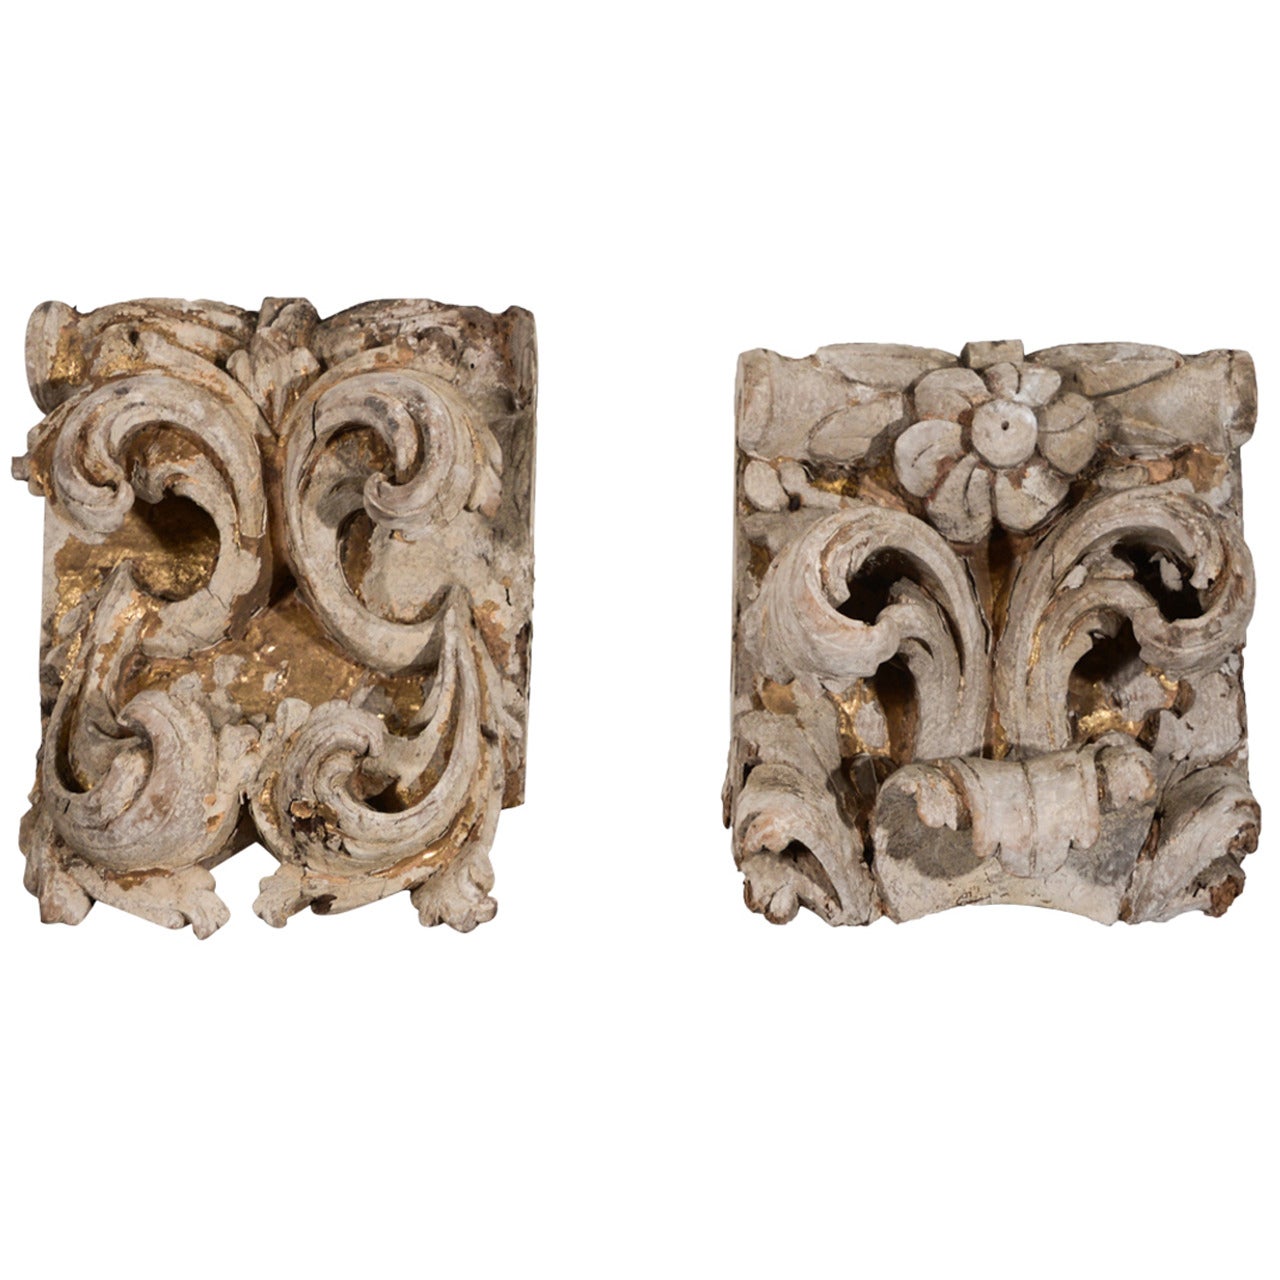 17th Century Portuguese Carved Architectural Elements